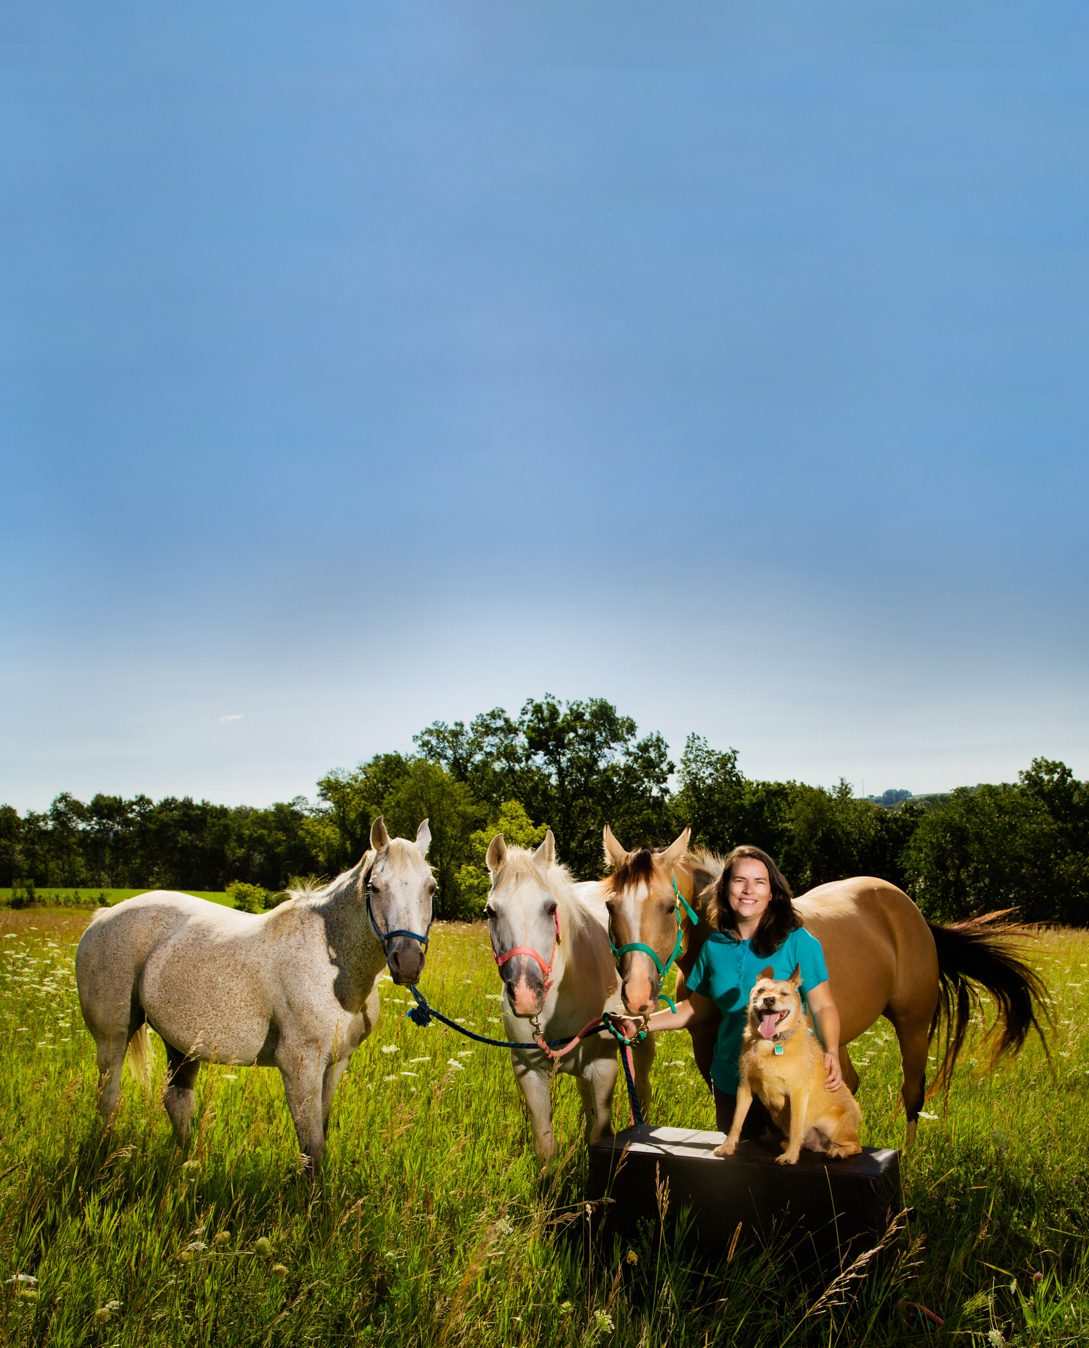 Dr. Jennifer Lorenz with her dog and 3 horses in the field